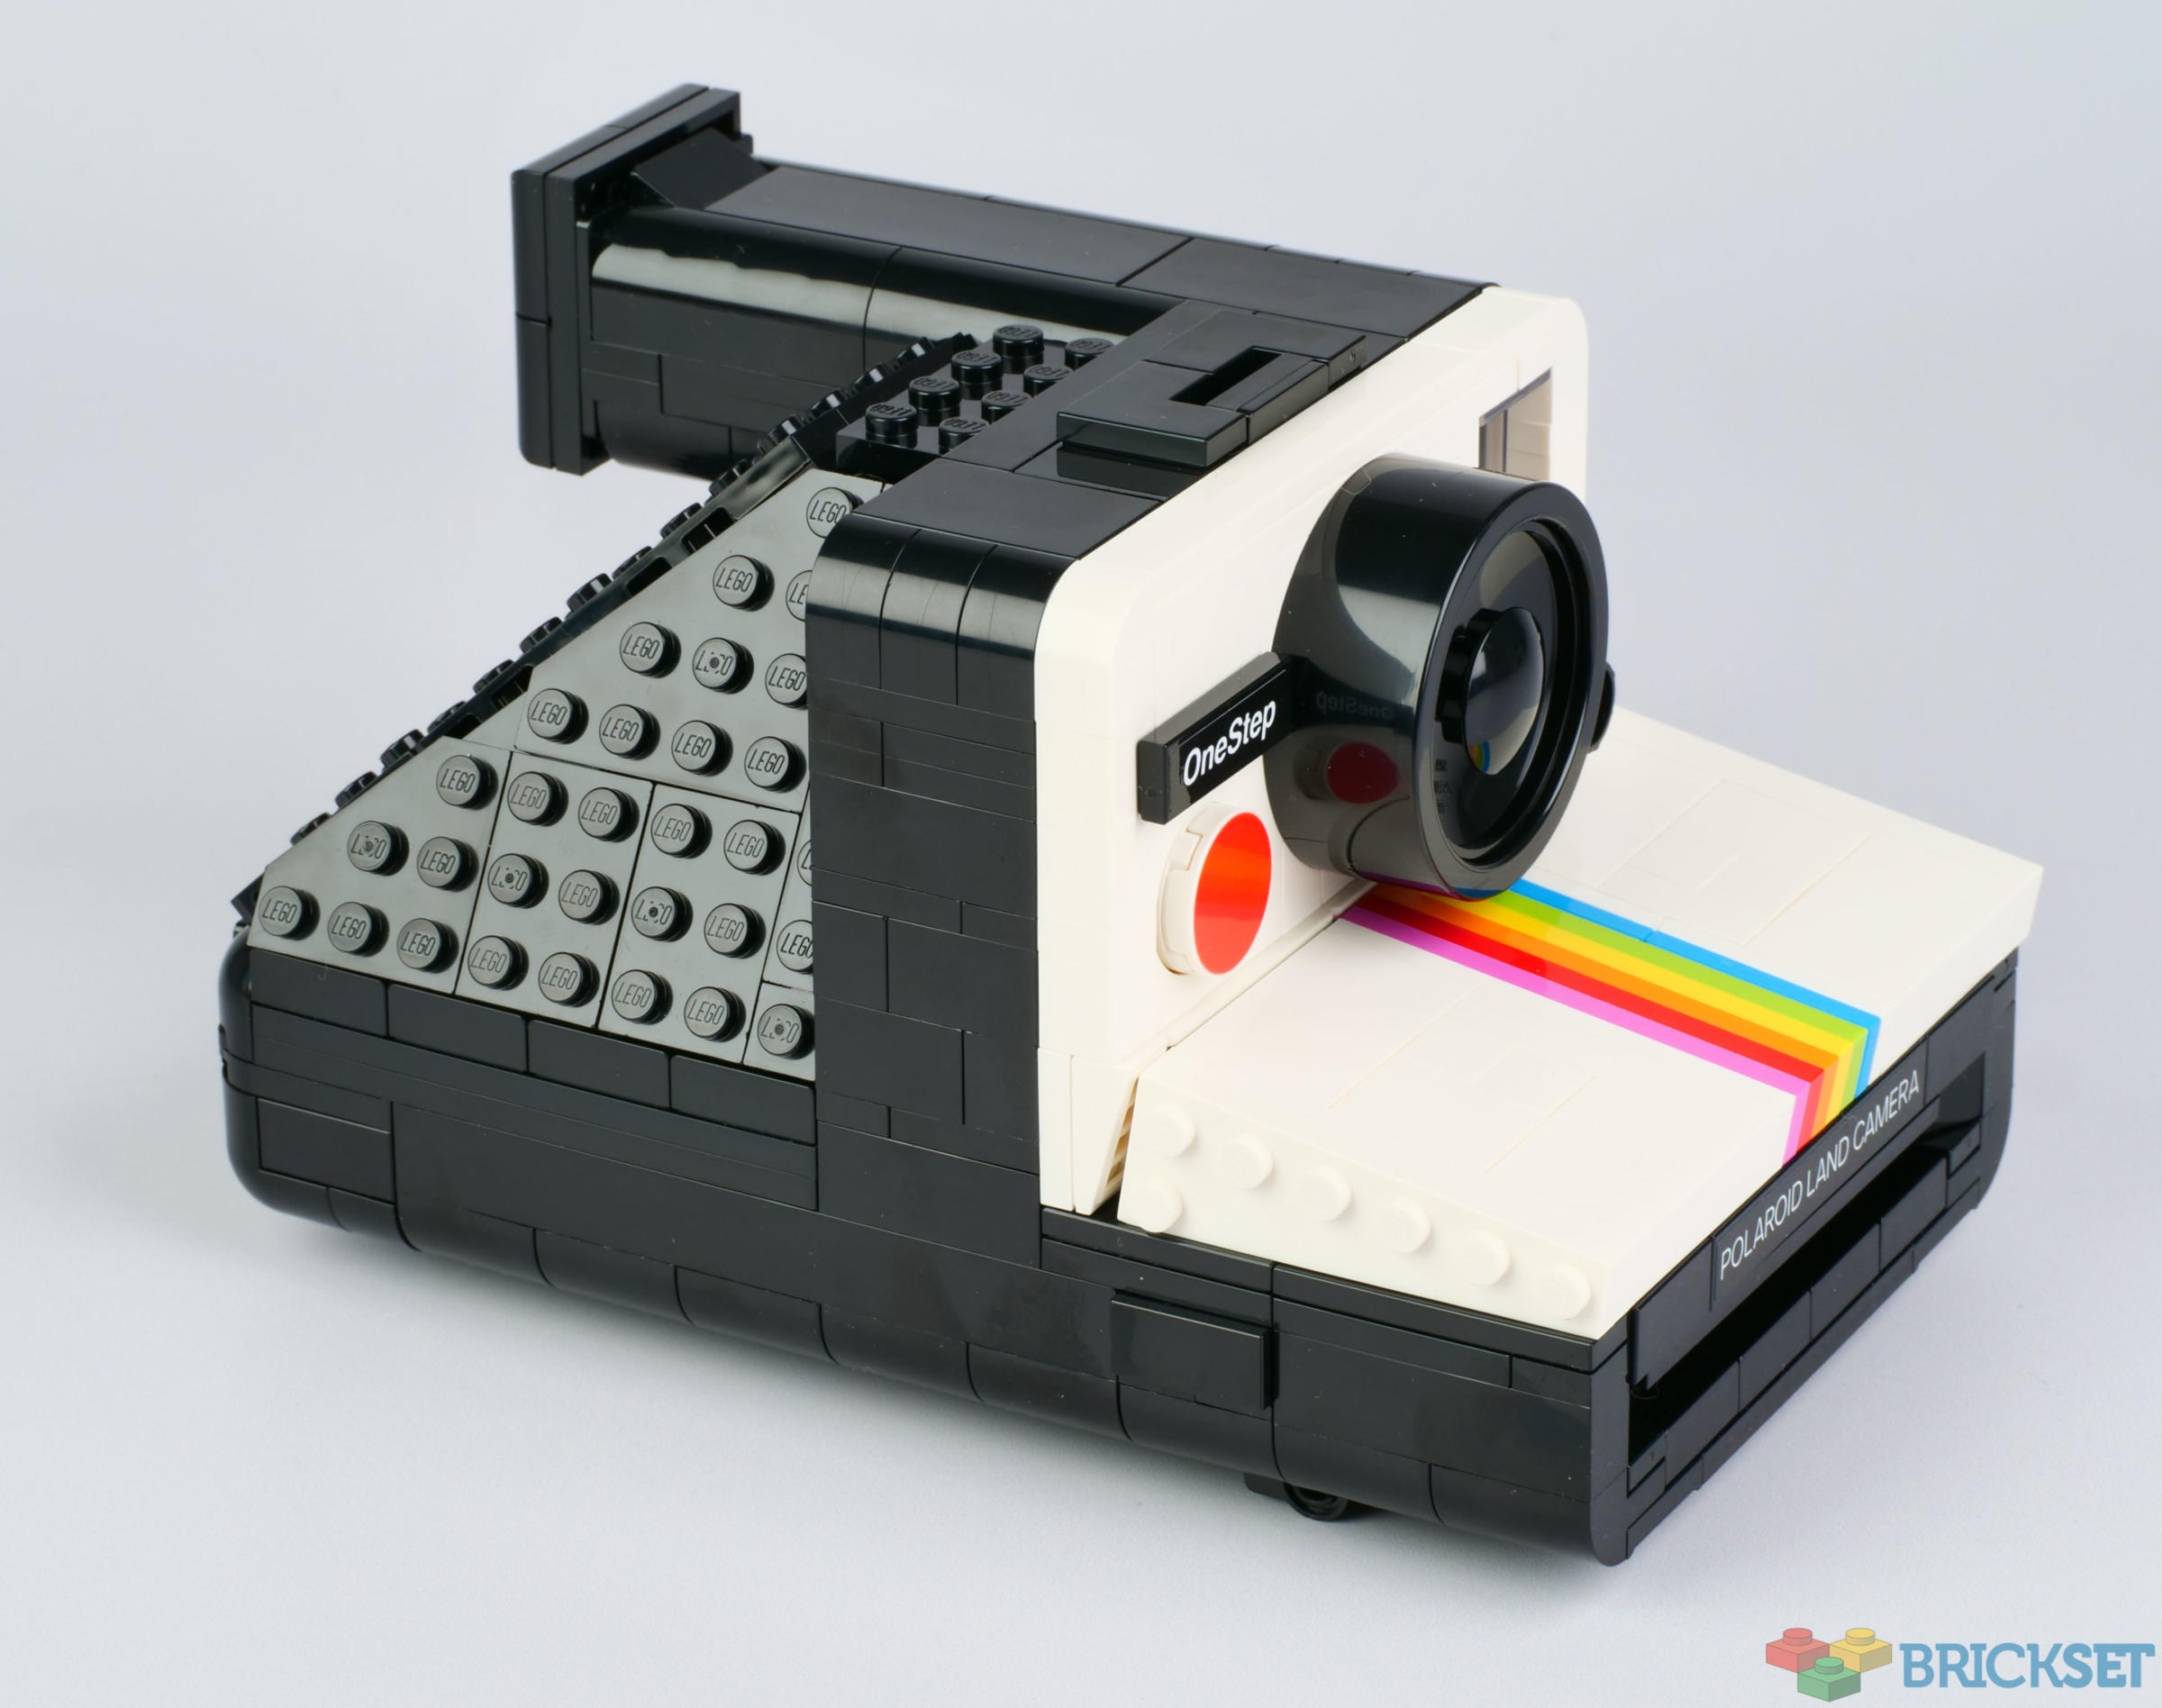 WILL YOU PRESS THE BUTTON? You can get any lego set you want